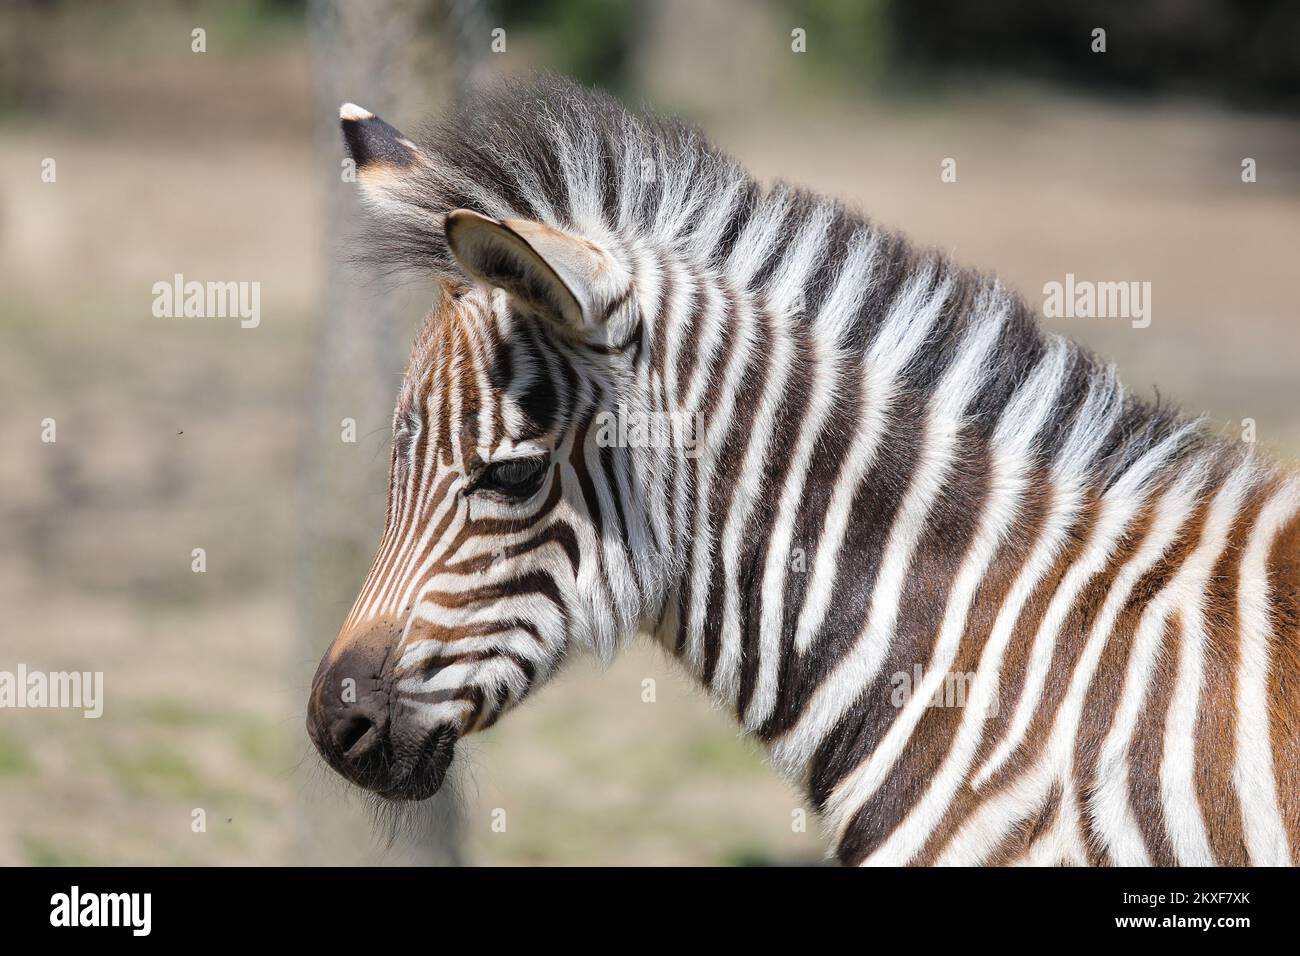 ., Zagreb, Croatia - A family of zebras living in Zagreb Zoo has  gained a new member. The little bundle of joy (still no name) was welcomed  by mother Sabina, father Gustav